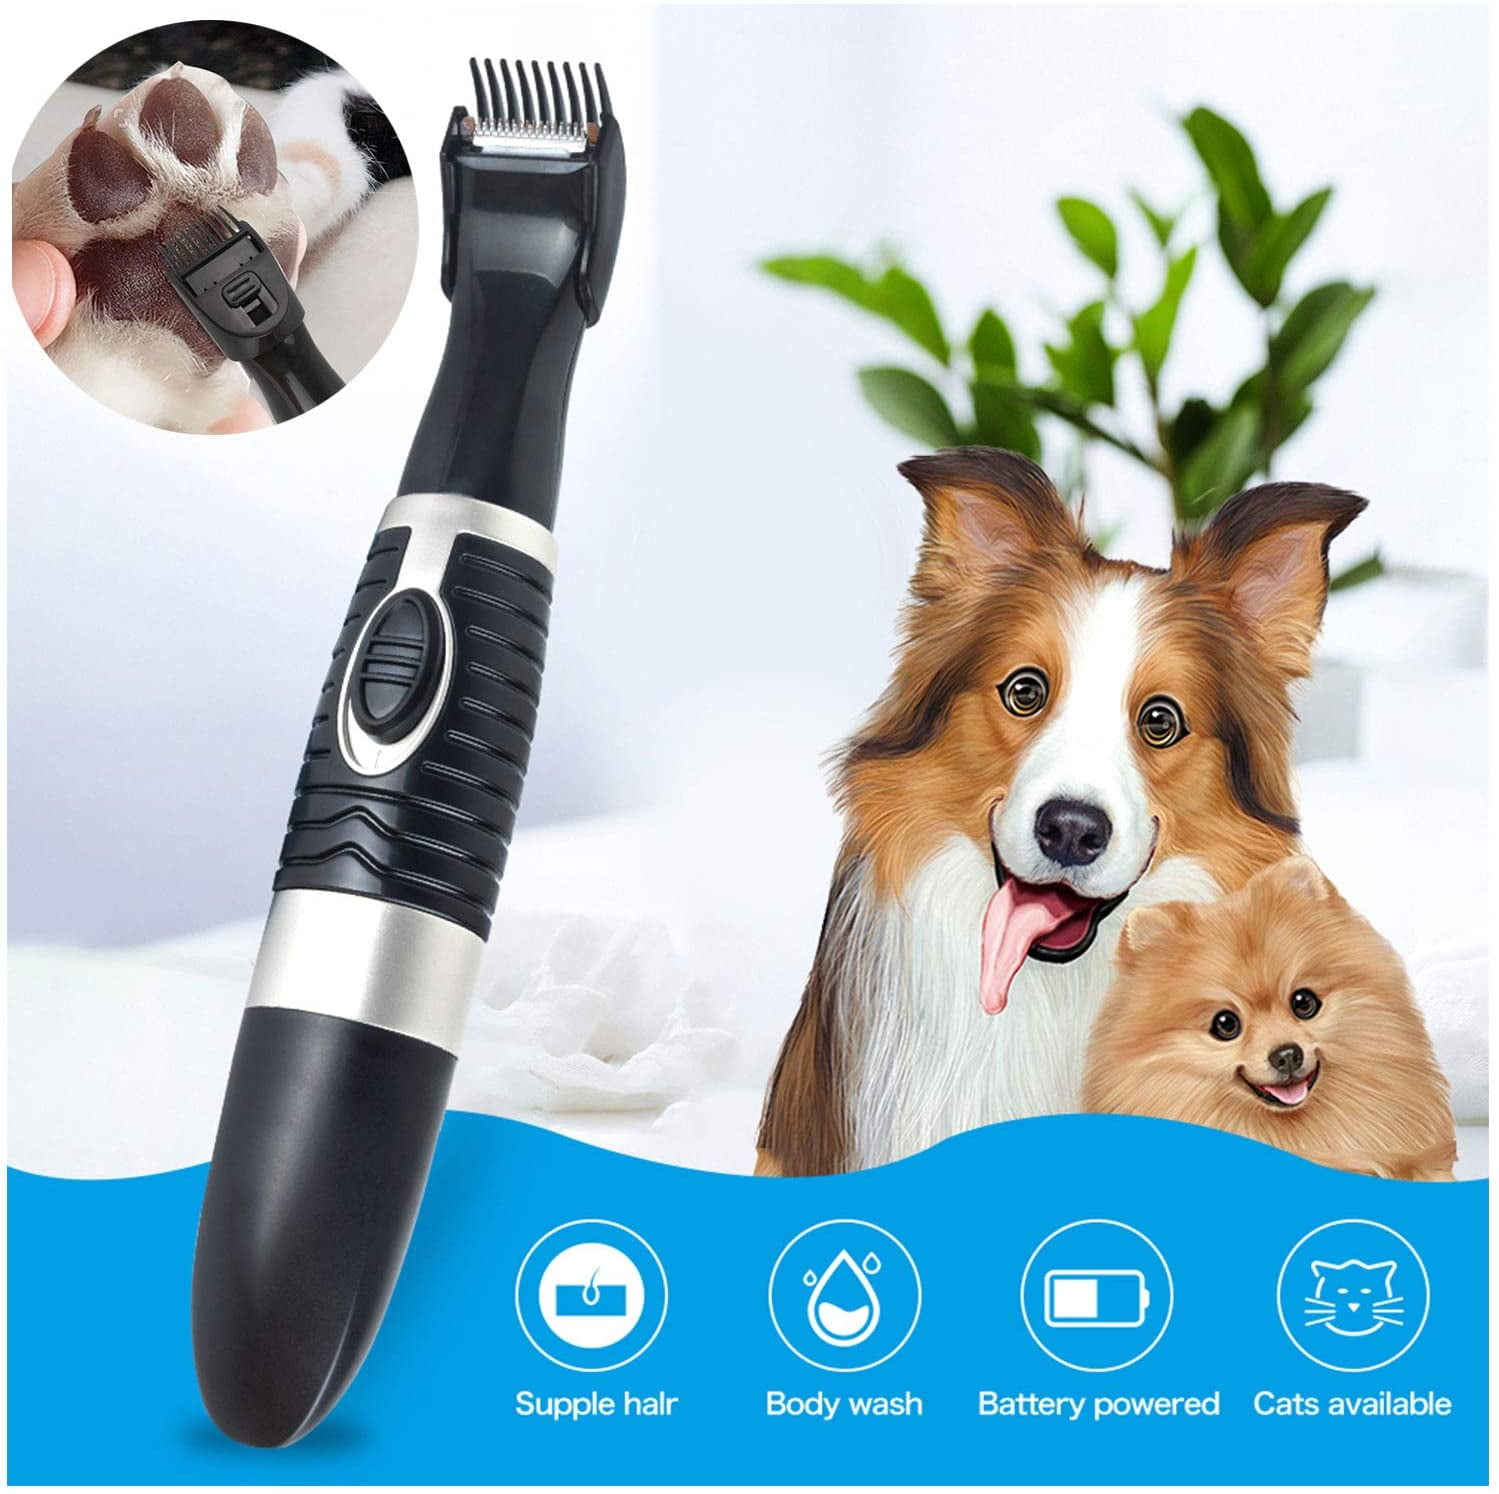 Dog Clippers, Pet Paw Trimmer, Cordless and Small Dogs Clipper Low Noise Electric Pet Trimmer Dog Grooming for Trimming The Hair Around Paws, Eyes, Ears, Face, Rump Walmart.com